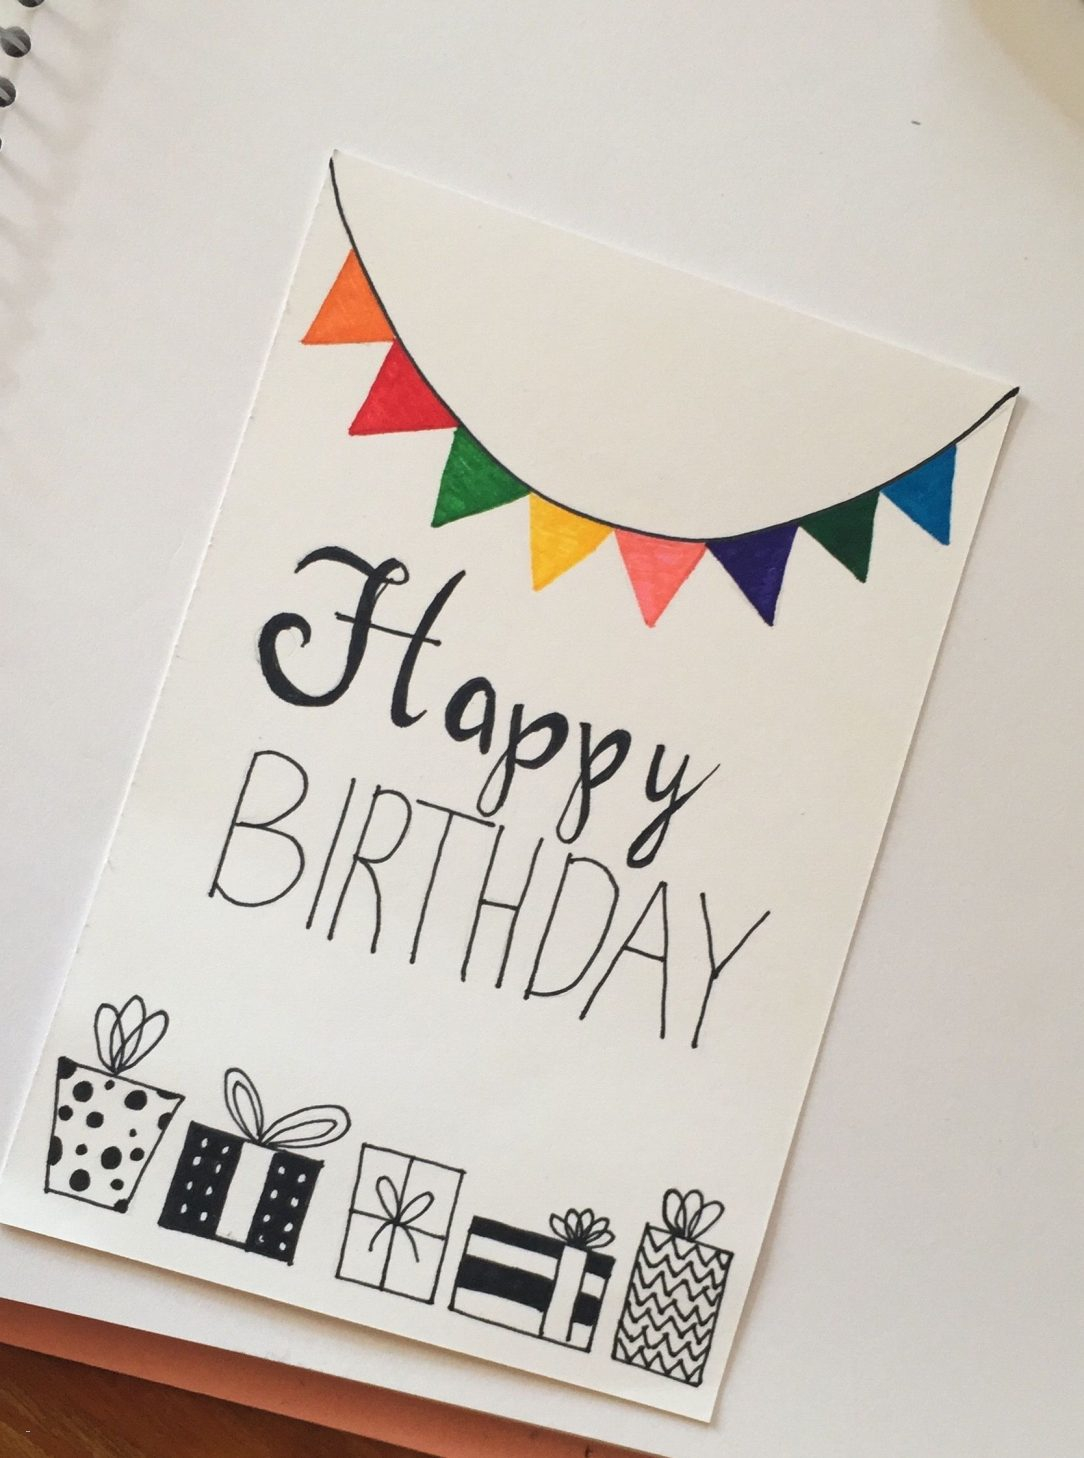 Birthday Card Ideas For Mother Simple Birthday Cards For Mother Homemade In Law Mom Envelopes Ideas